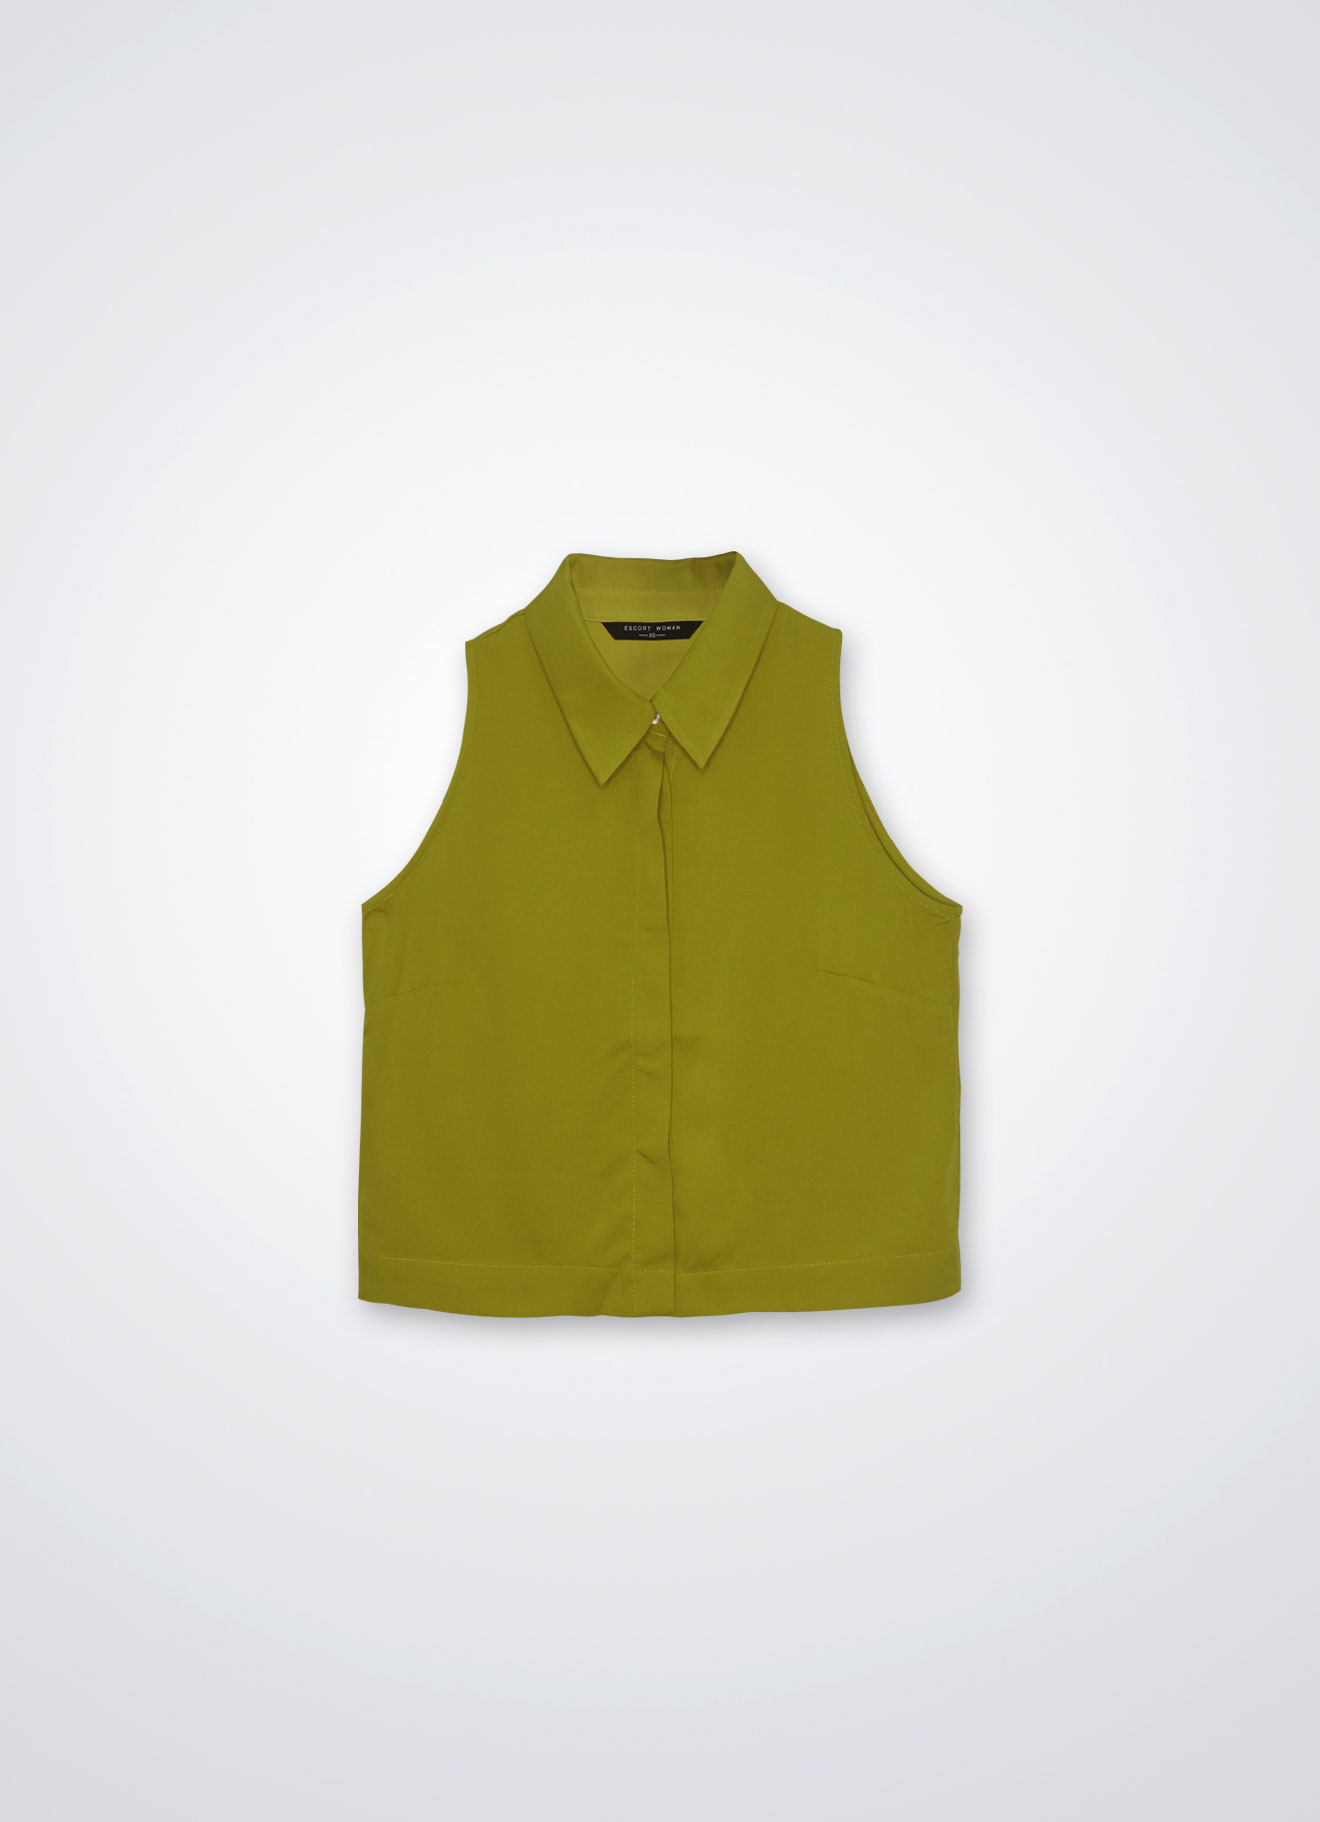 Oil-Yellow by Sleeveless